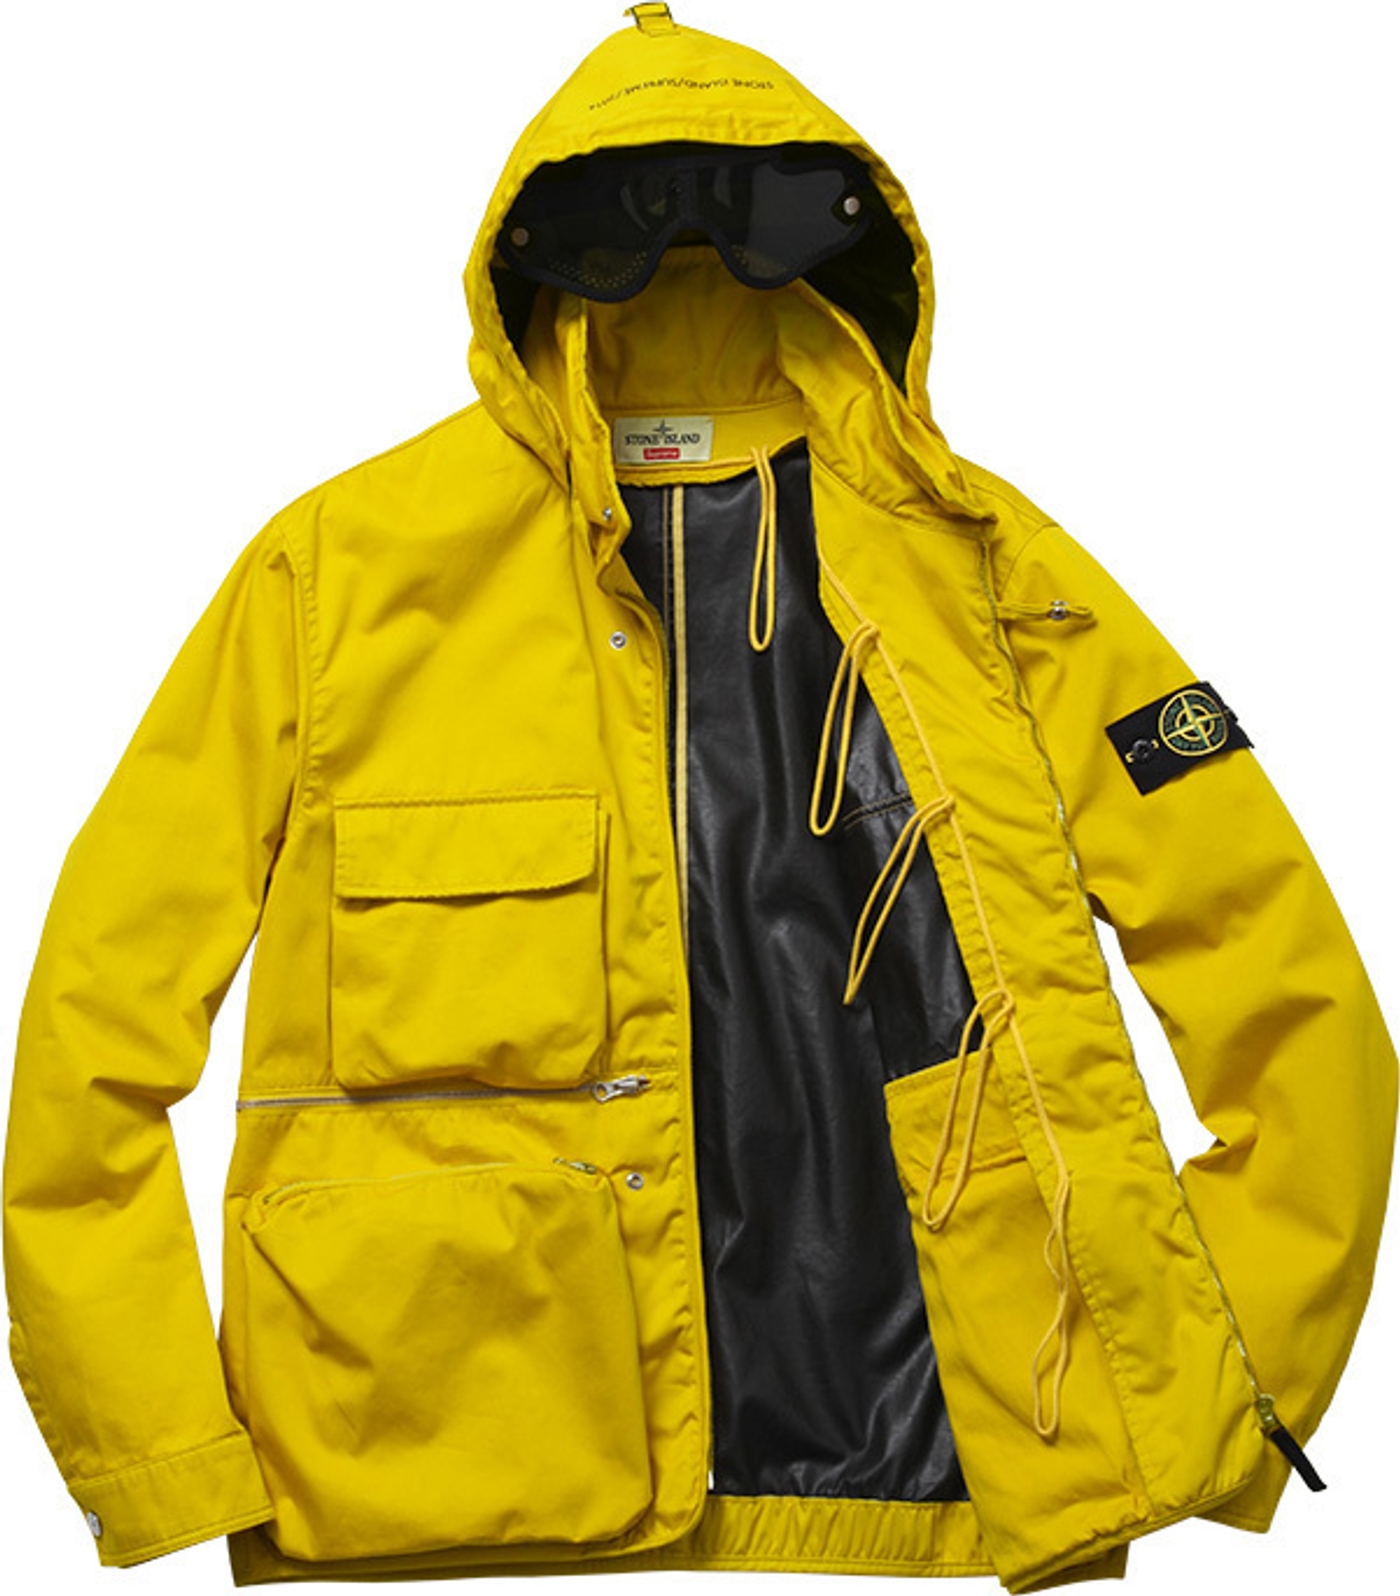 Raso Gommato Cover Nero Jacket 
Wind and water-resistant cotton with removable down liner. Removable eye mask with stow away hood.<br>
Made by Stone Island<br> (7/36)